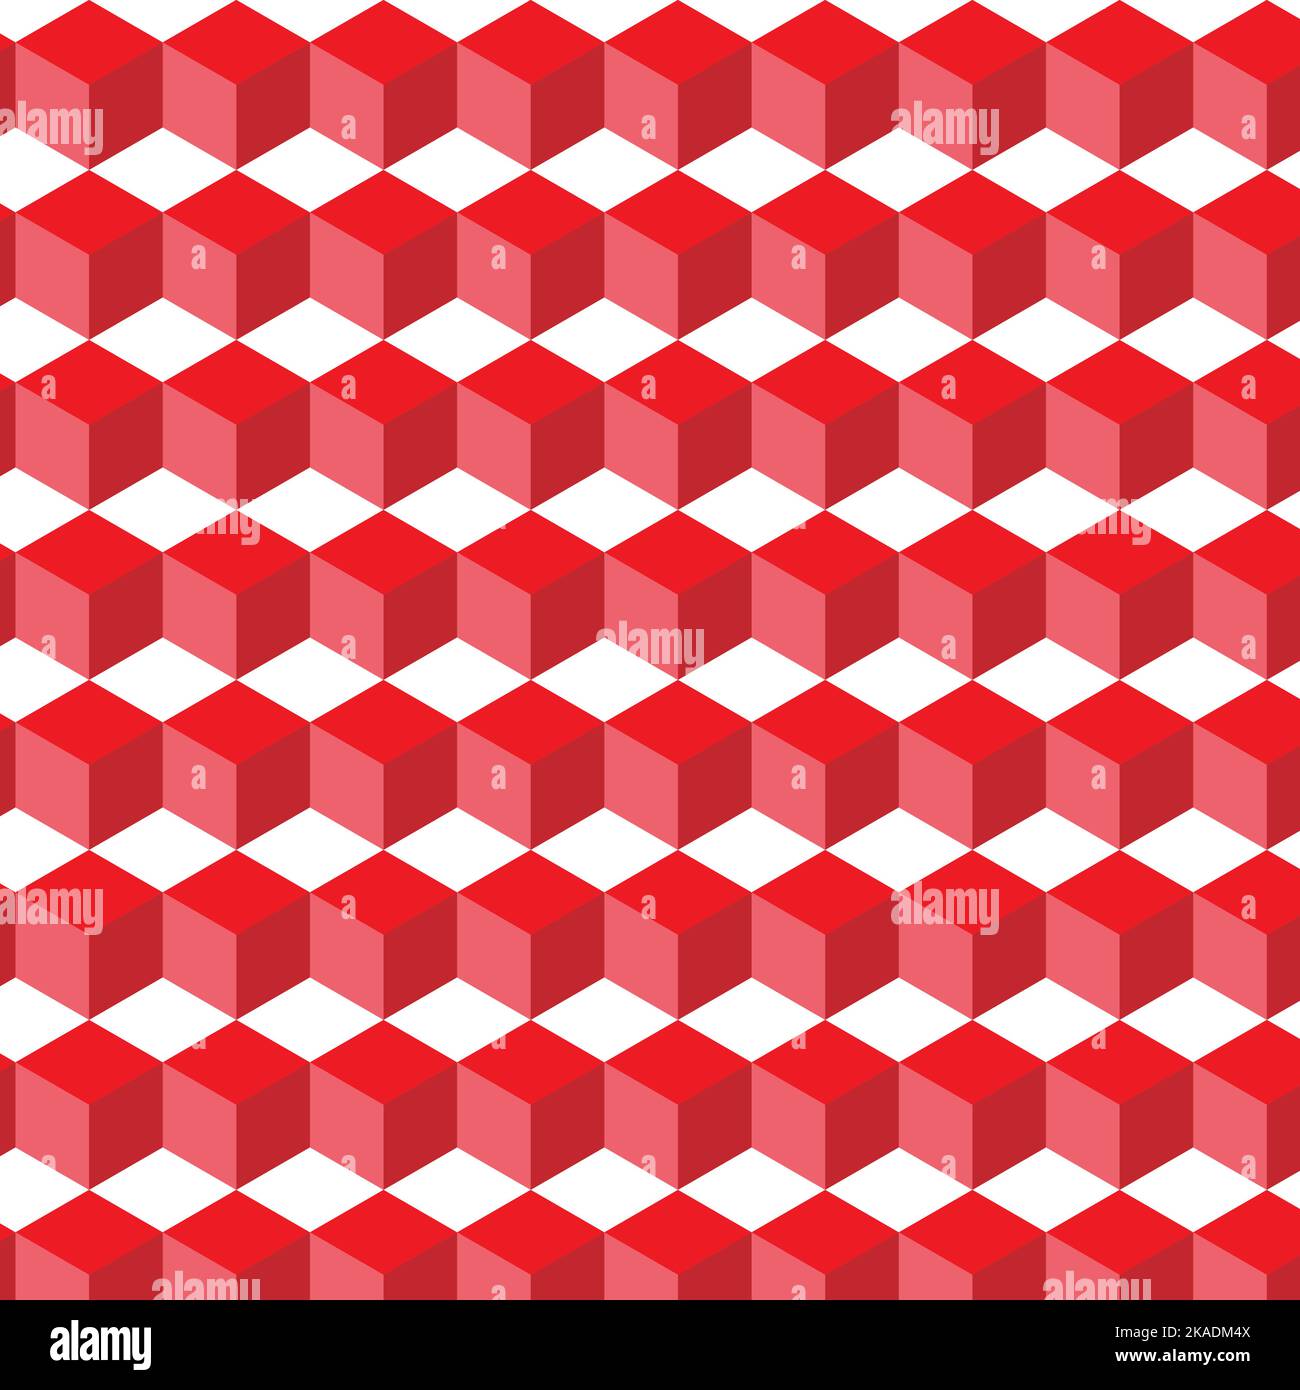 pattern graphic drawing of cubes of red color on a white background. Vector seamless layout. Stock Vector